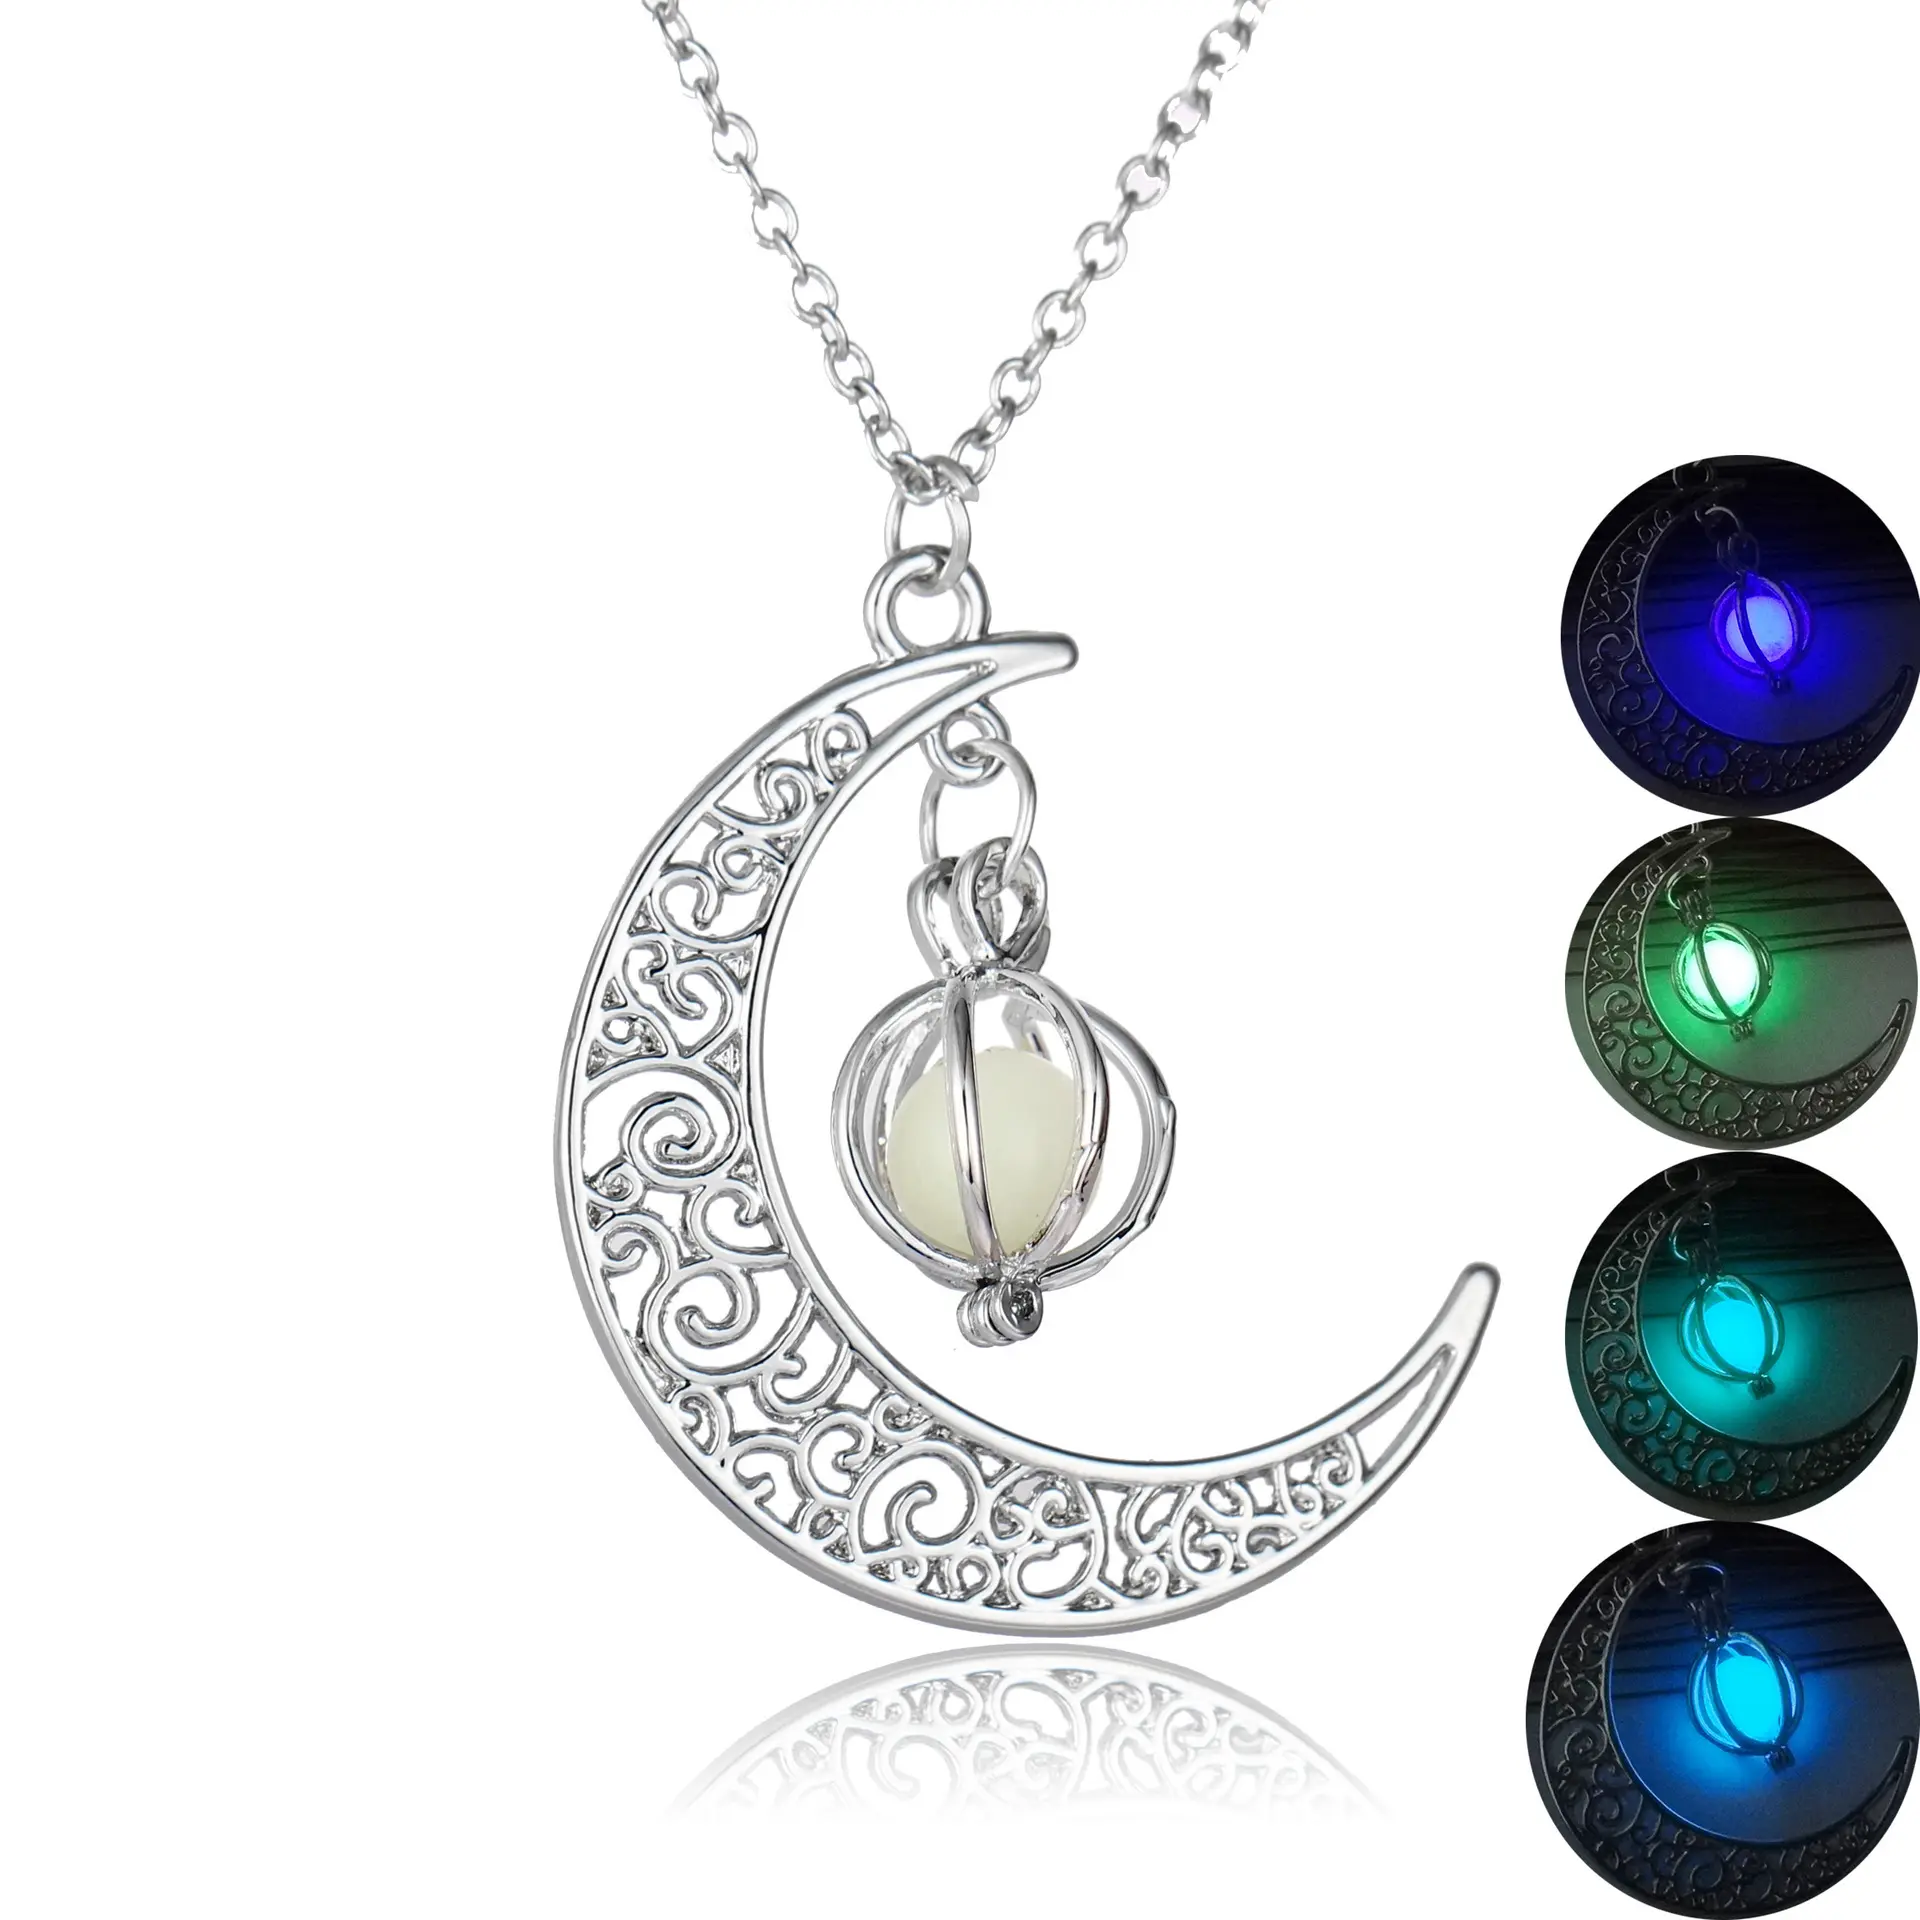 Neo Gothic Glowing In The Dark Moon Pendant Necklace Women Pumpkin Lantern Charm Luminous NecklacesためHalloween Jewelry Gifts